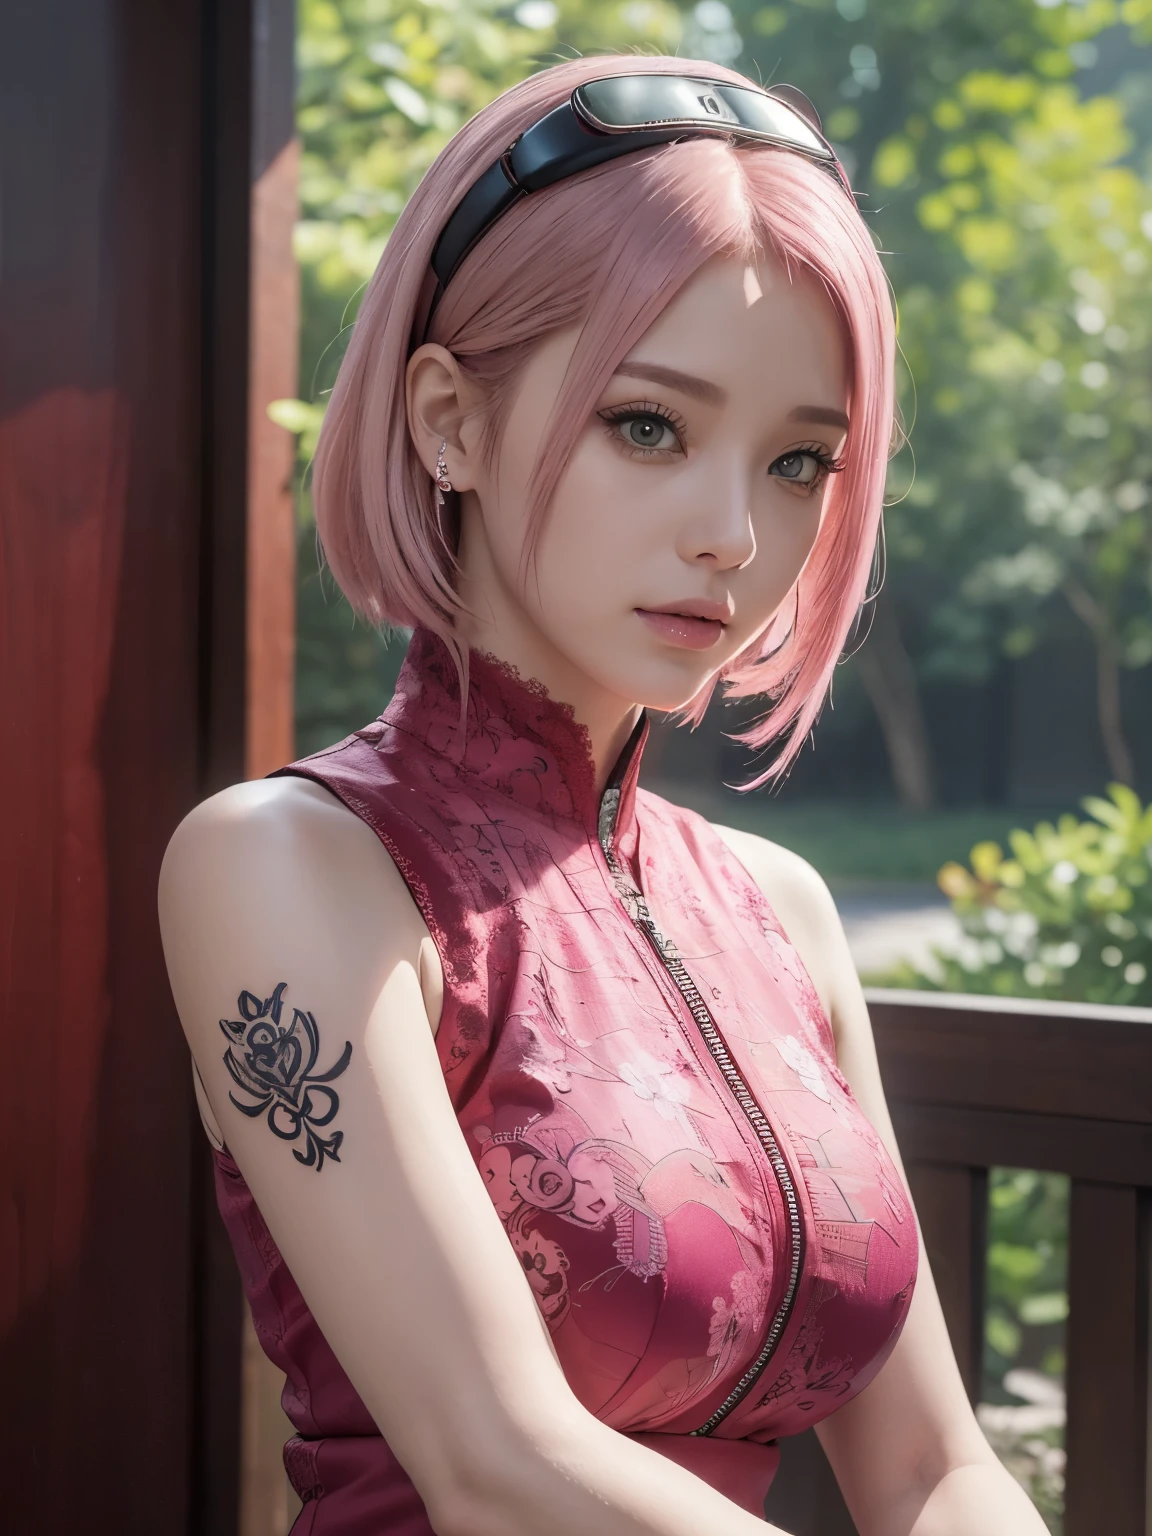 (((masterpiece+highest quality+High resolution+Very detailed))), Sakura Haruno, solo, (([woman]: 1.3 + [beauty]: 1.3+ pink hair: 1.5)), pink eyes, Bright Eyes, Dynamic angles and postures, wallpaper, ((natural big breasts:1.2)), Sakura Haruno outfit, (Ultra Realistic:1.5), (Photo Realistic:1.5), (UHD:1.5), red qipao dress(sleeveless ) with slits along the sides accompanied by a zipper and white circular designs, crystal tattoo at the forehead, slim body shape, NSFW, (lace:1.2)
